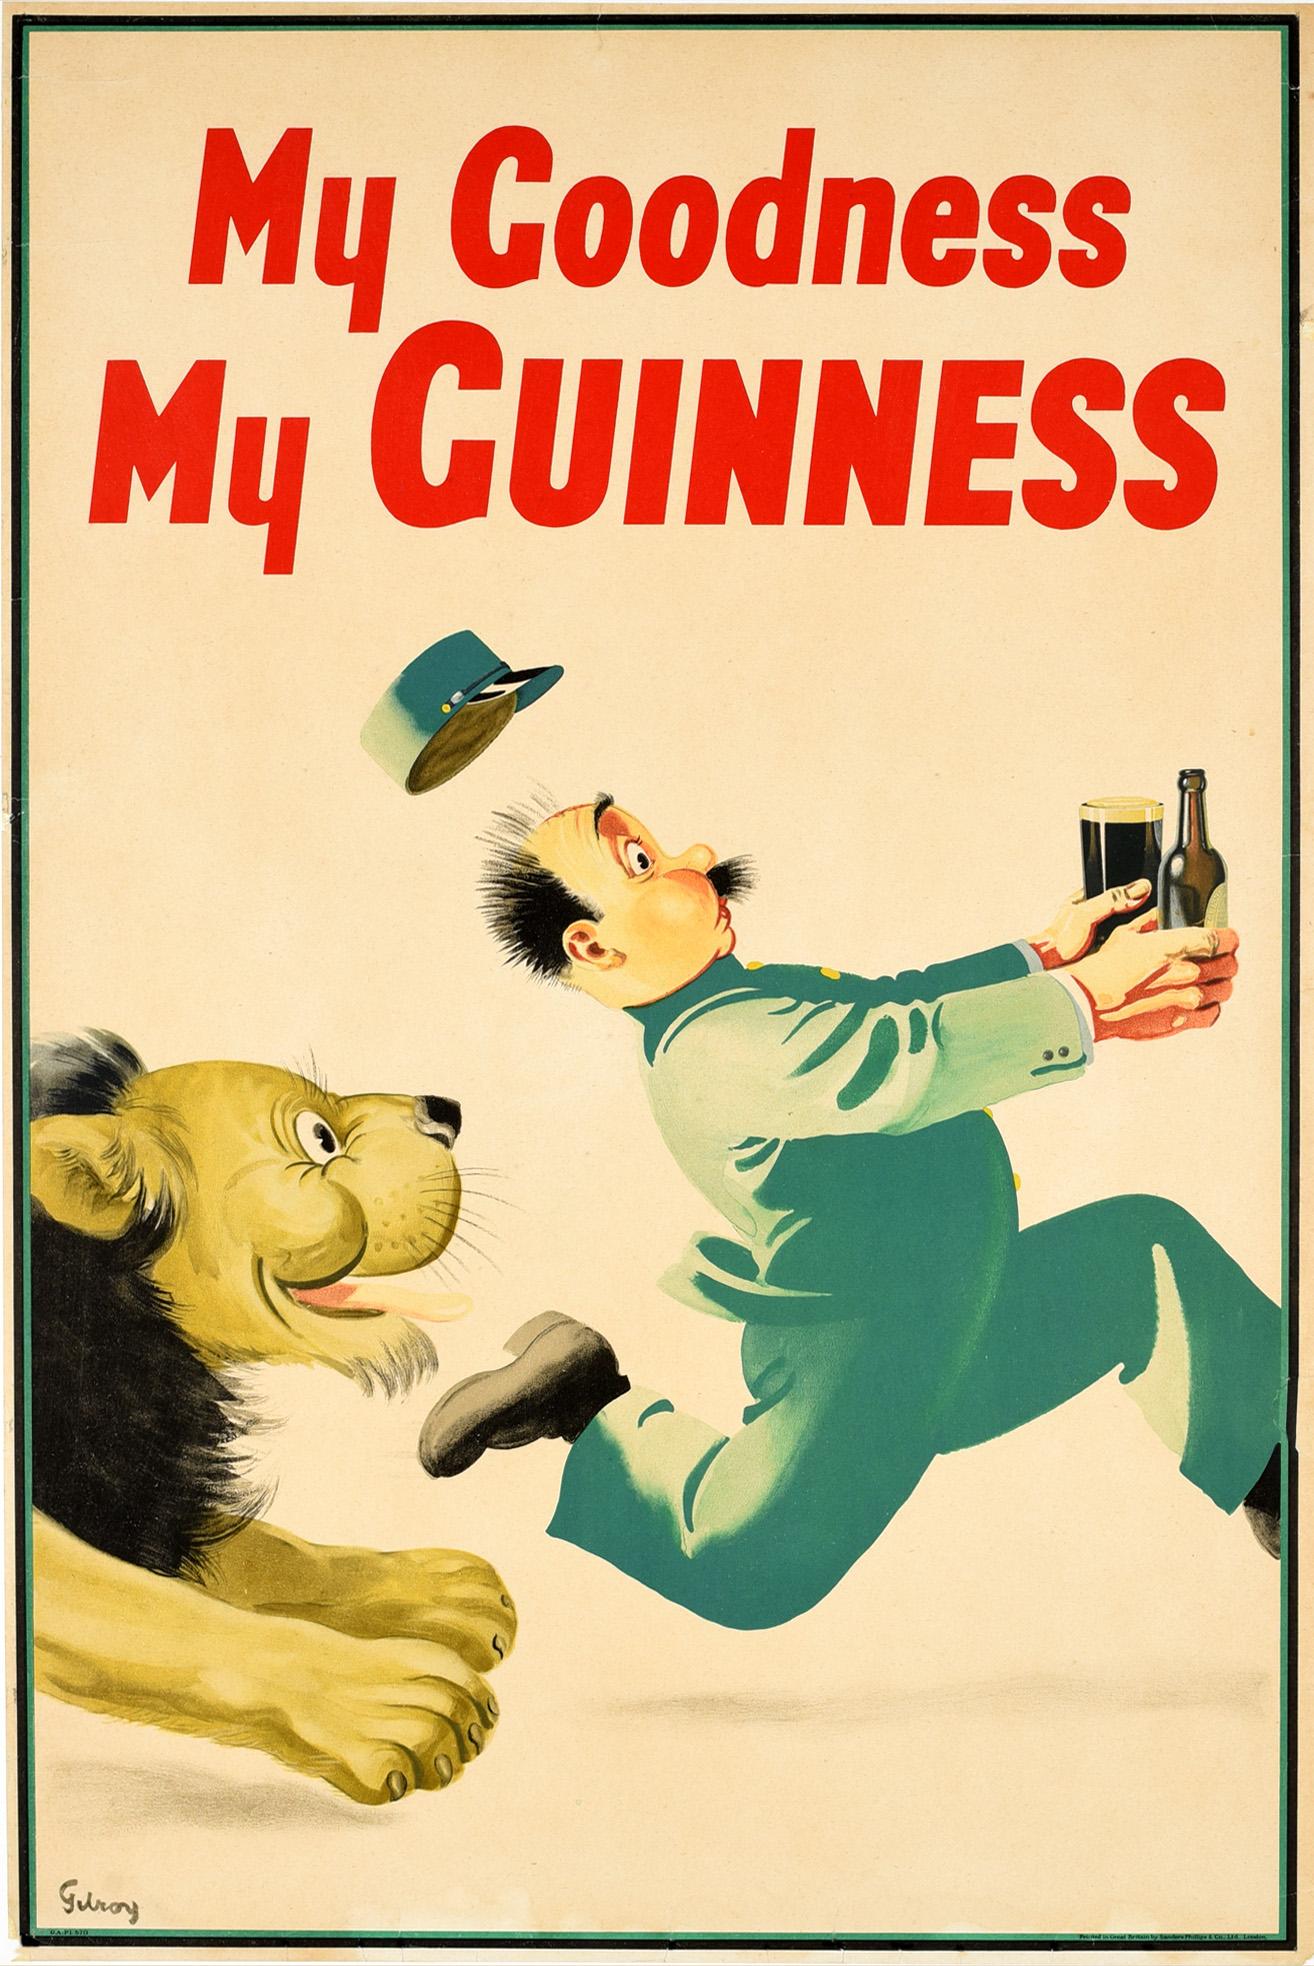 Original Vintage Drink Poster My Goodness My Guinness Lion Zoo Keeper Fun Design